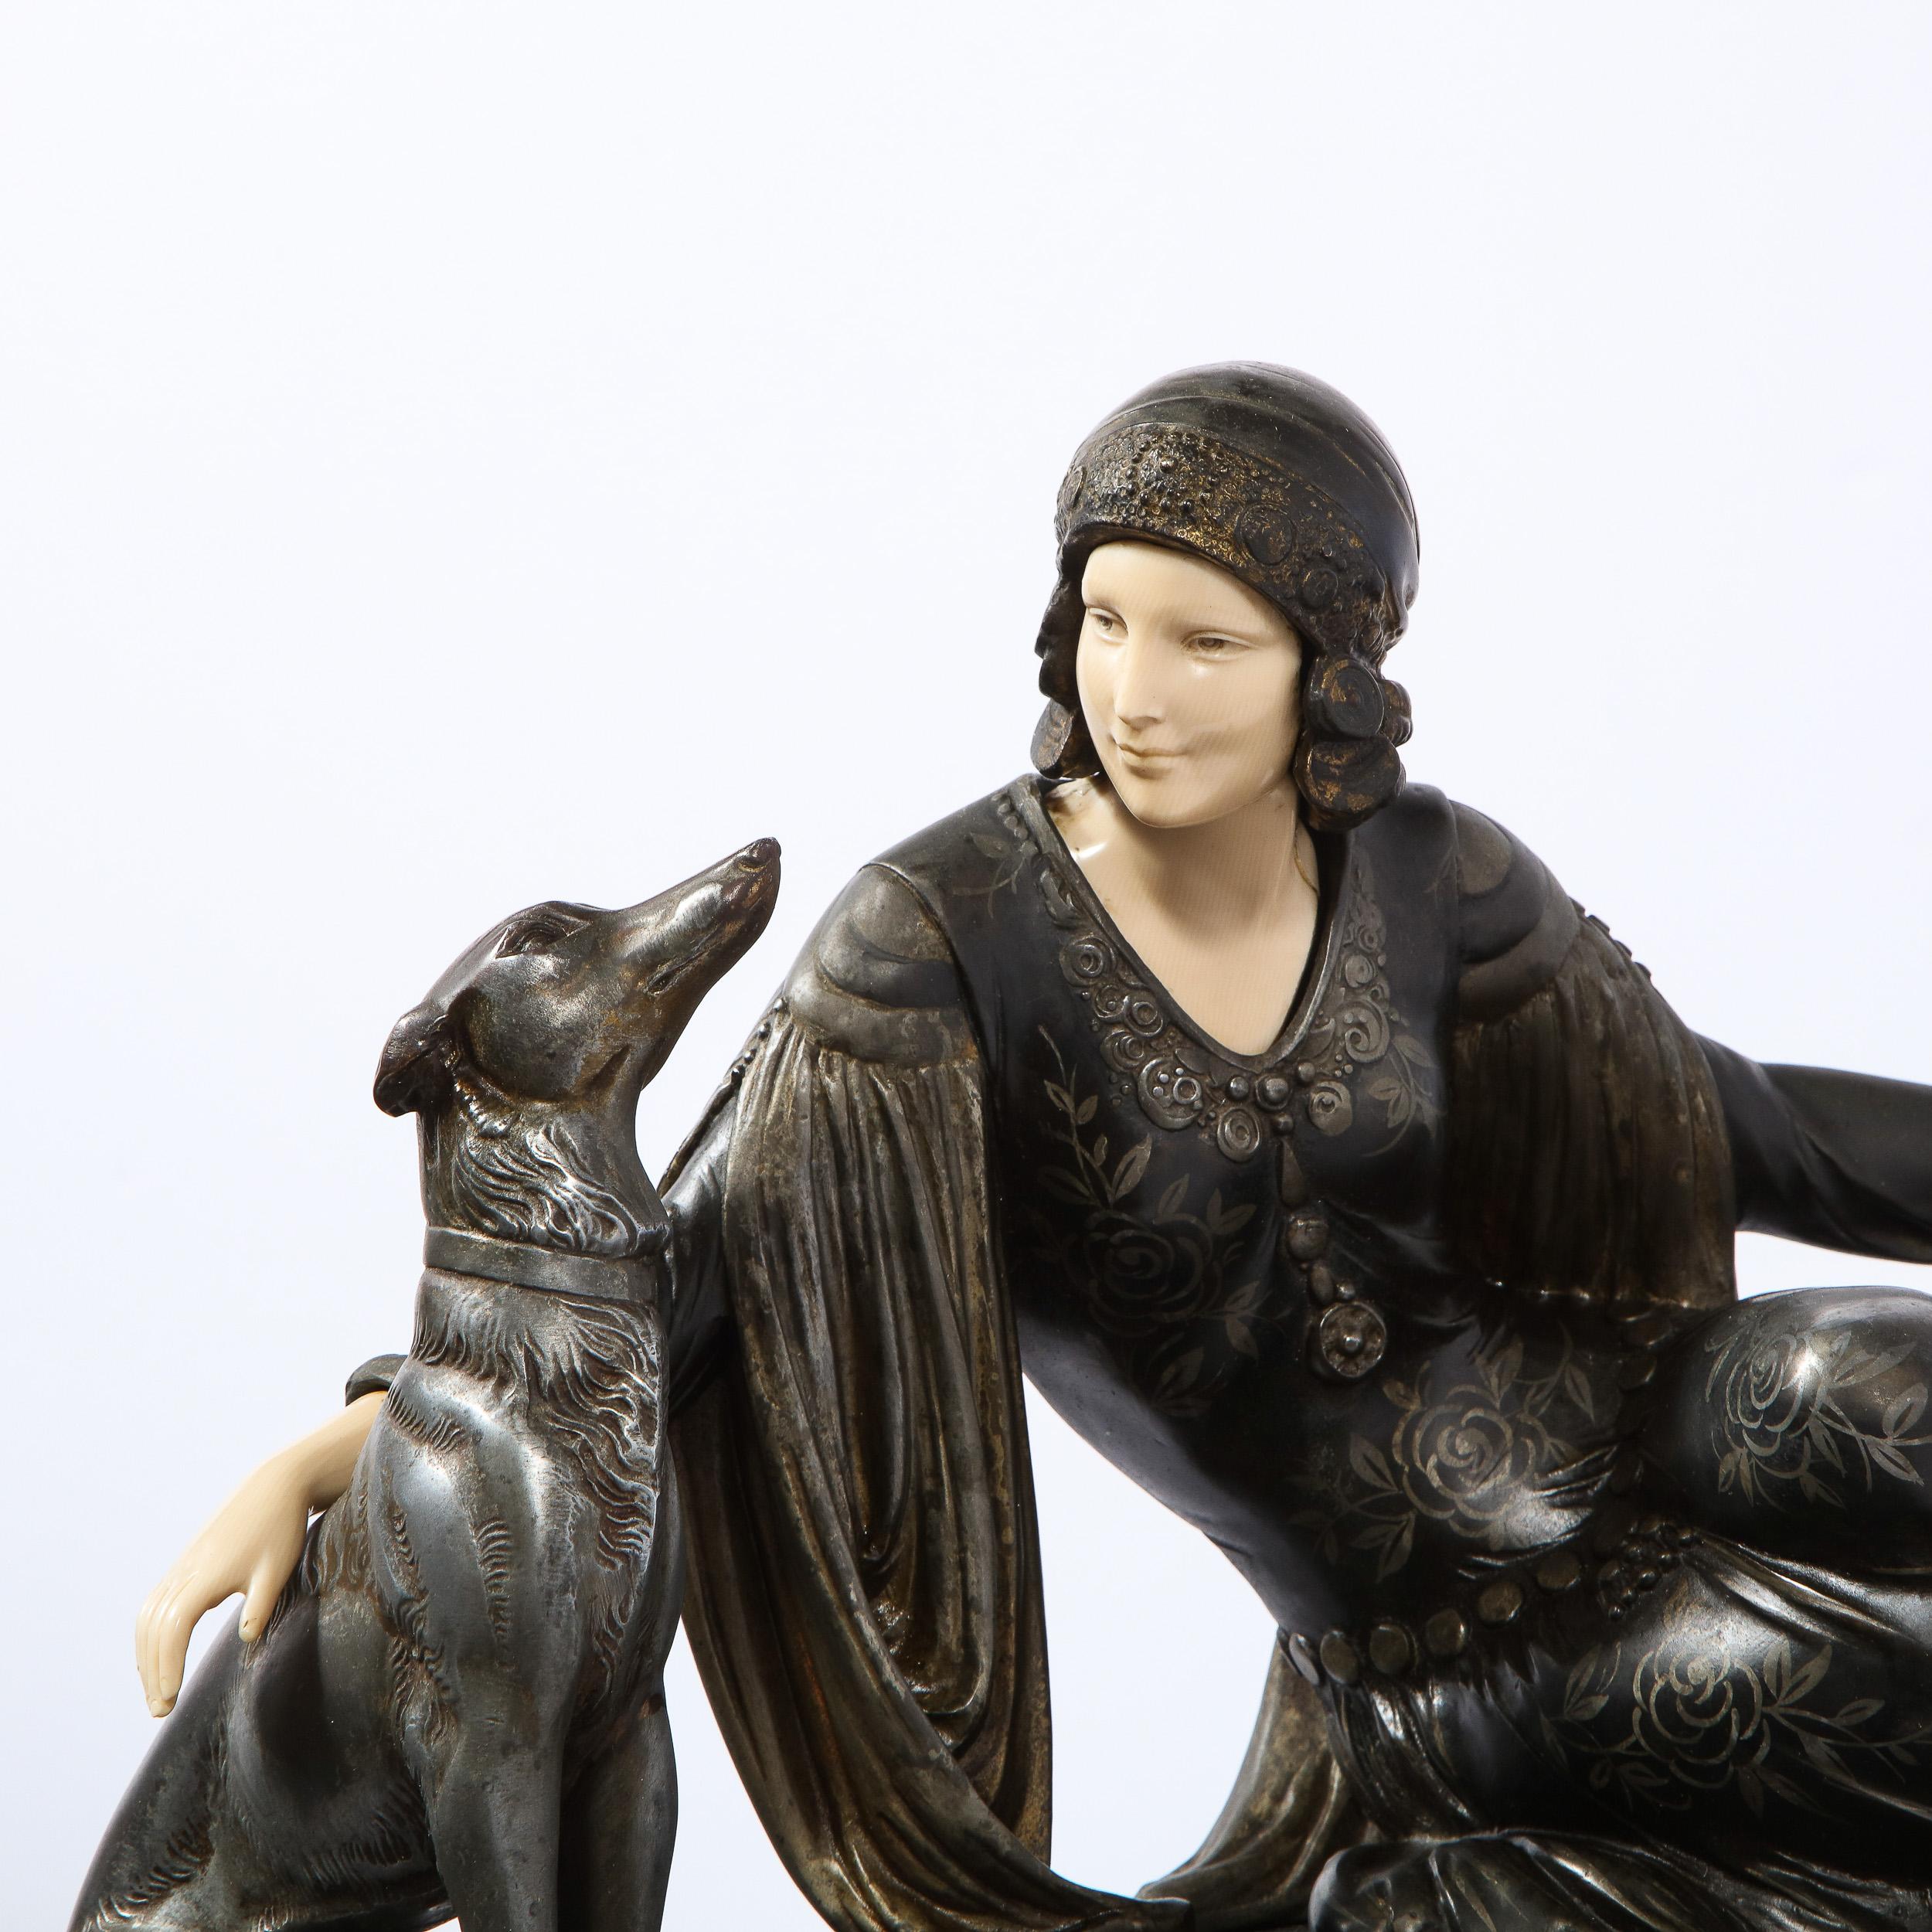 Mid-20th Century Art Deco Onyx, Bone & Silver Pewter Lady w/ Greyhounds Sculpture, After Chiparus